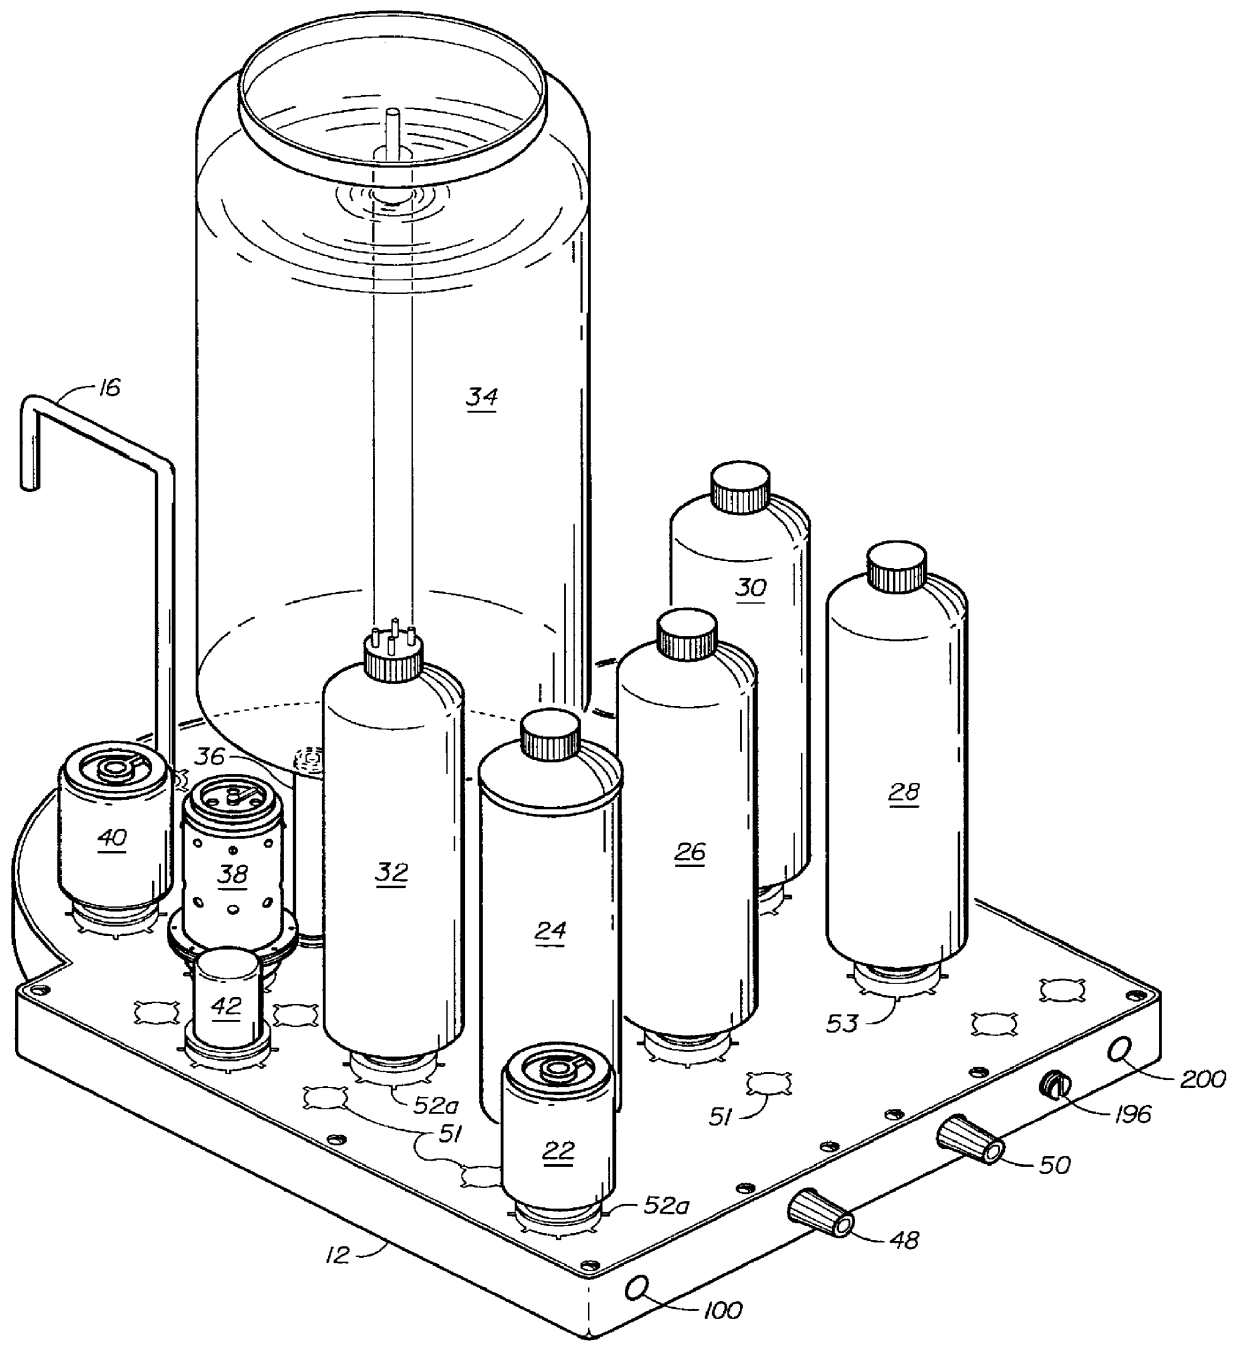 Counter top reverse osmosis water purification system